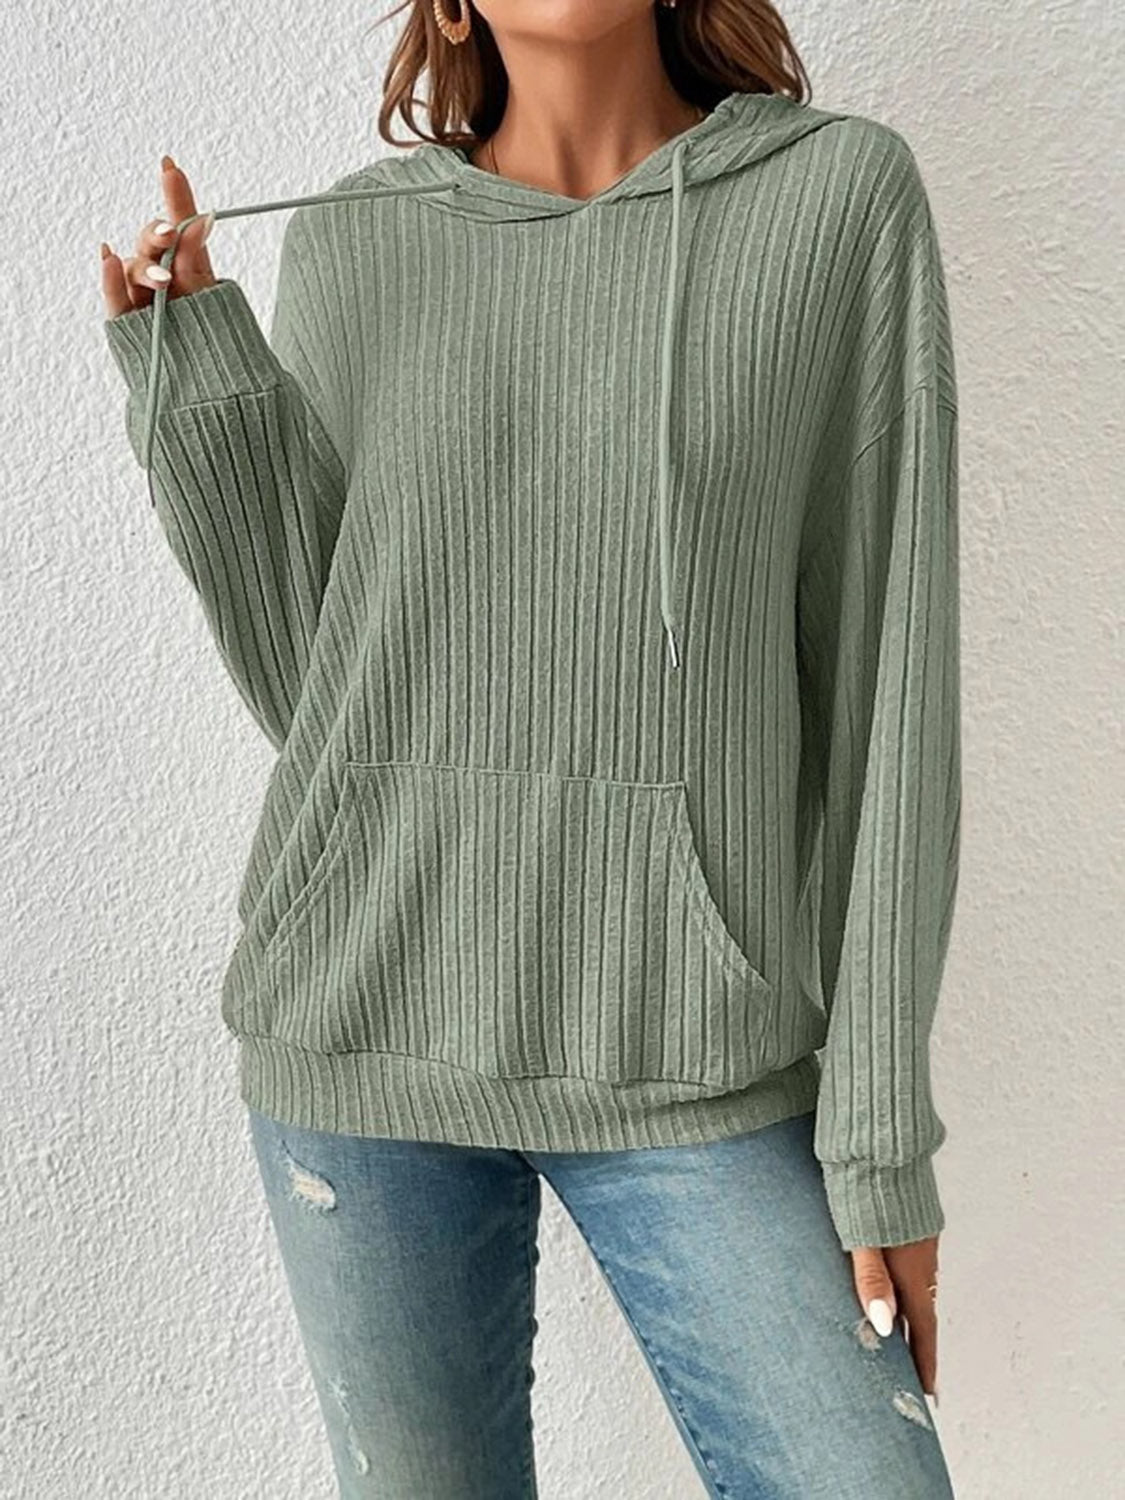 Ribbed Dropped Shoulder Drawstring Hoodie - Green / S - Women’s Clothing & Accessories - Shirts & Tops - 6 - 2024